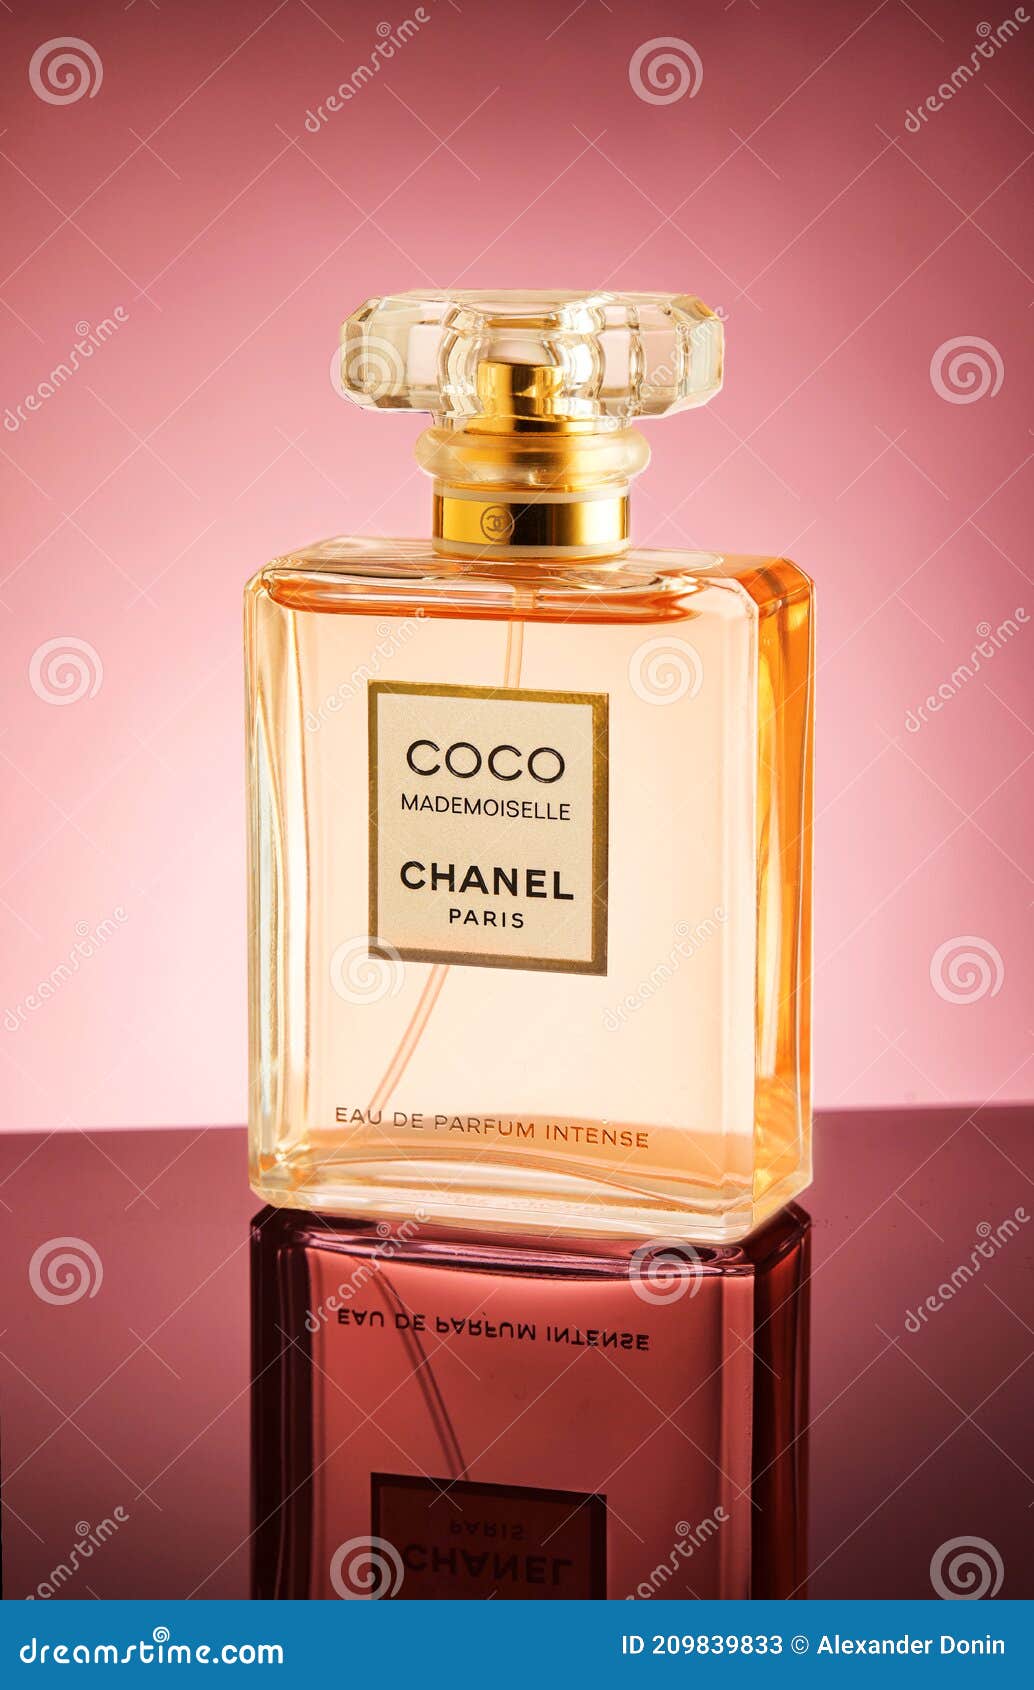 French Perfume Chanel Coco Mademoiselle. Editorial Stock Photo